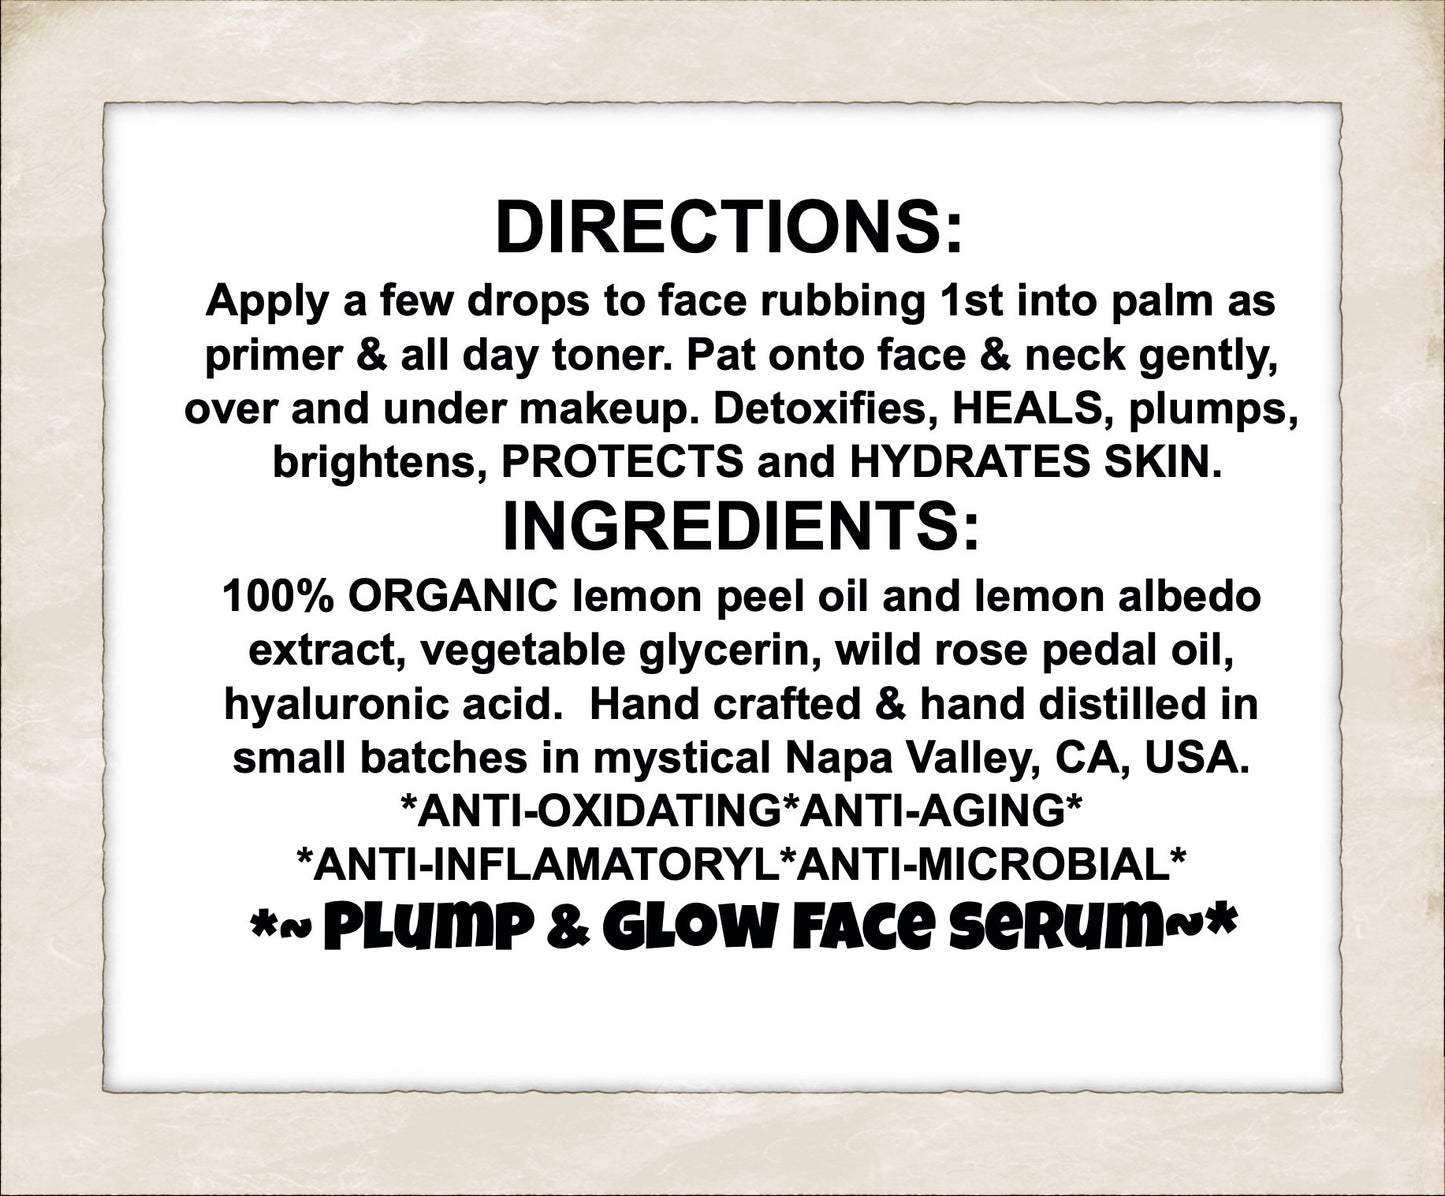 Plump & Glow Serum for face